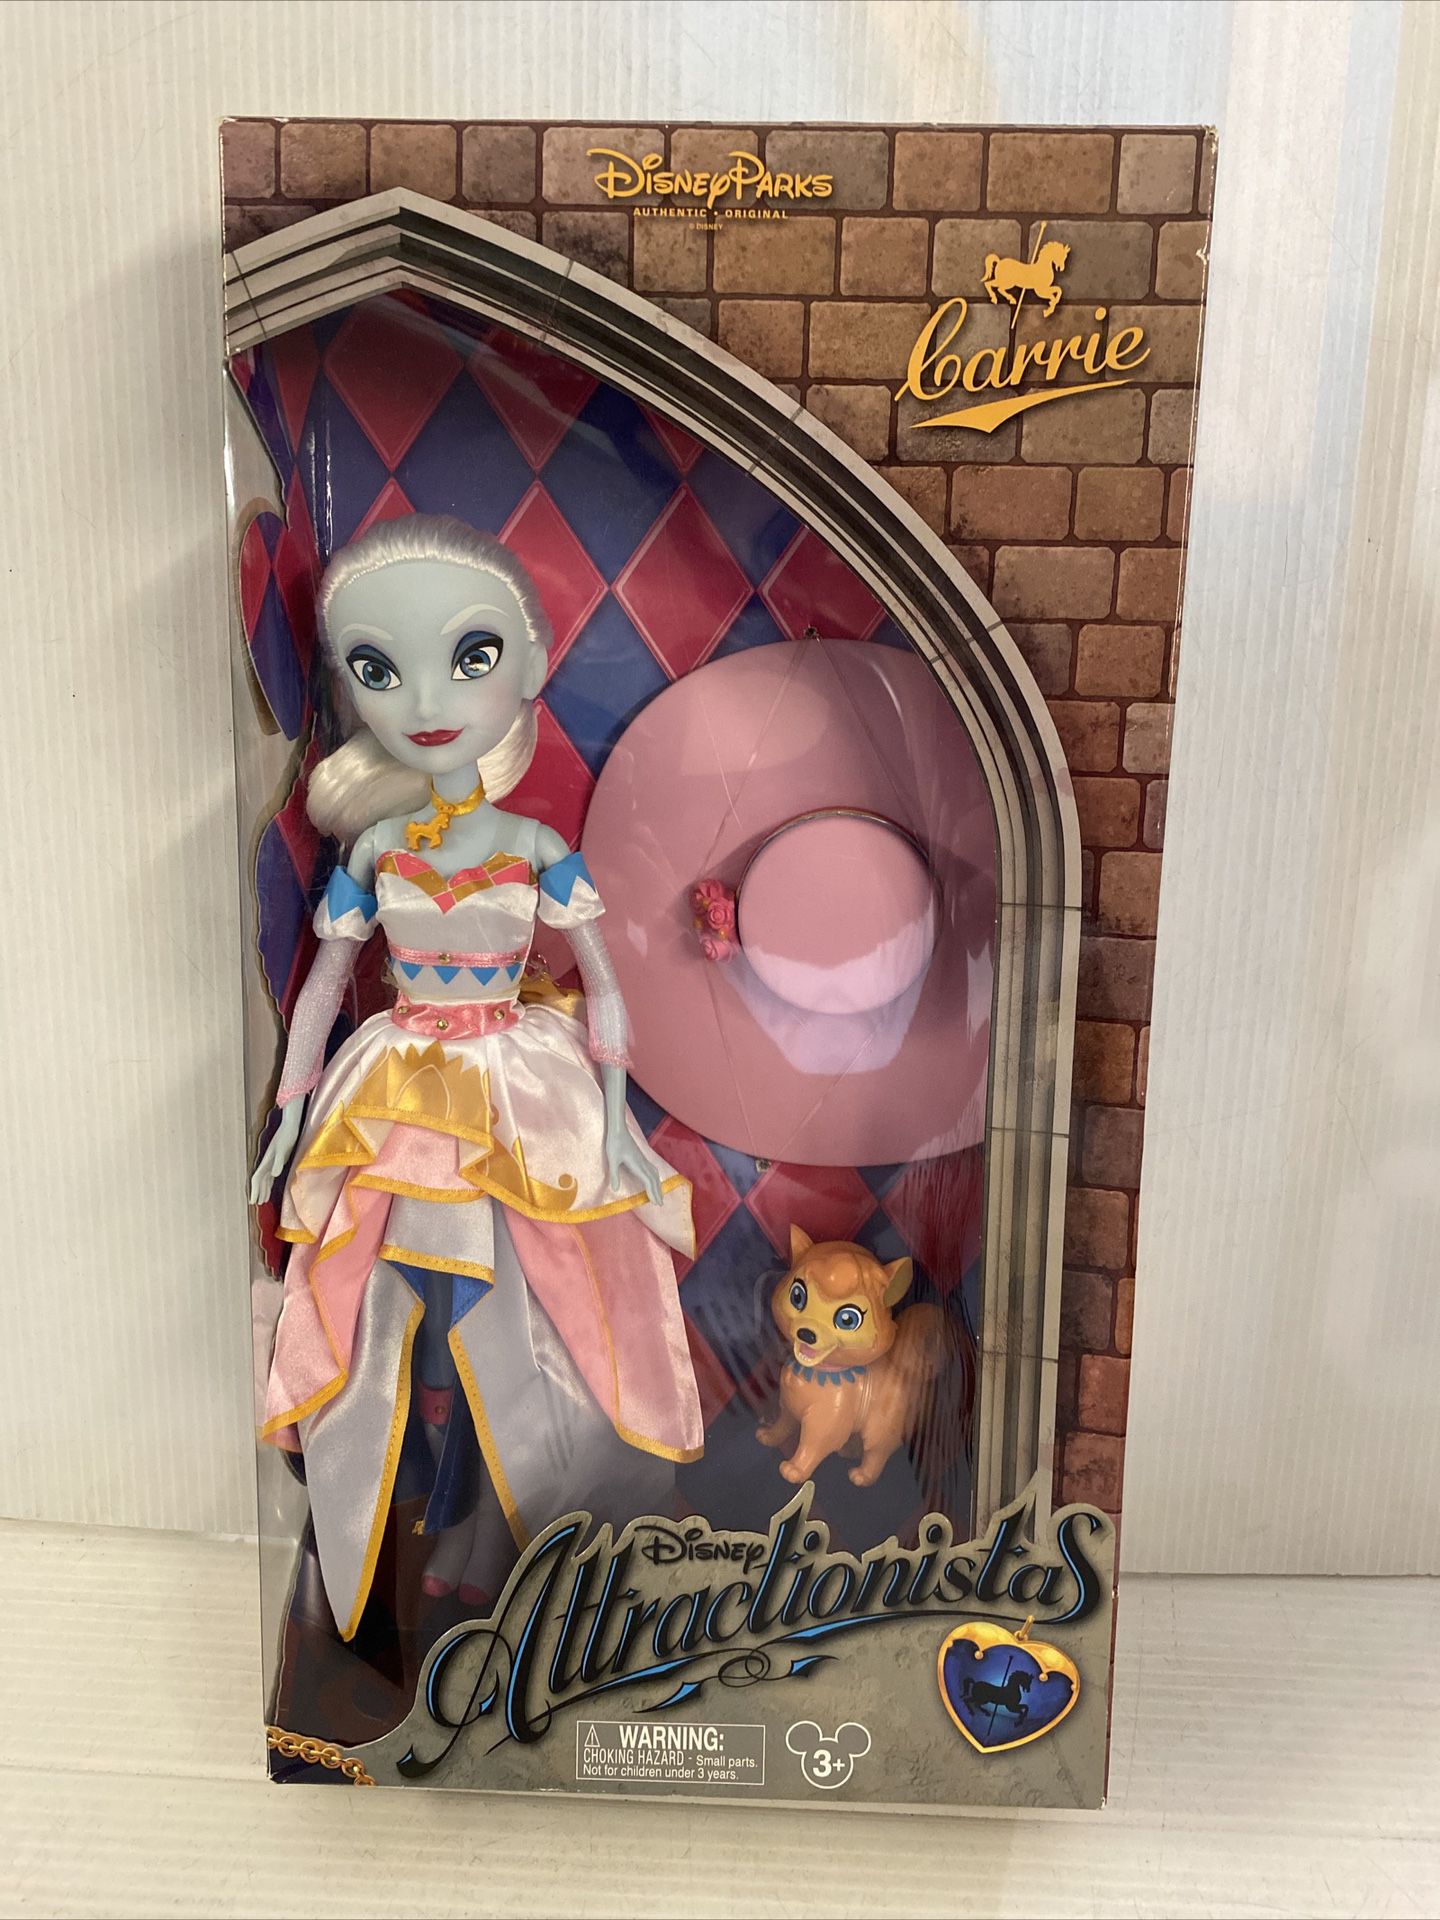 Disney Parks Attractionistas 12" Fashion Doll Carrie & Dog Carousel NEW!